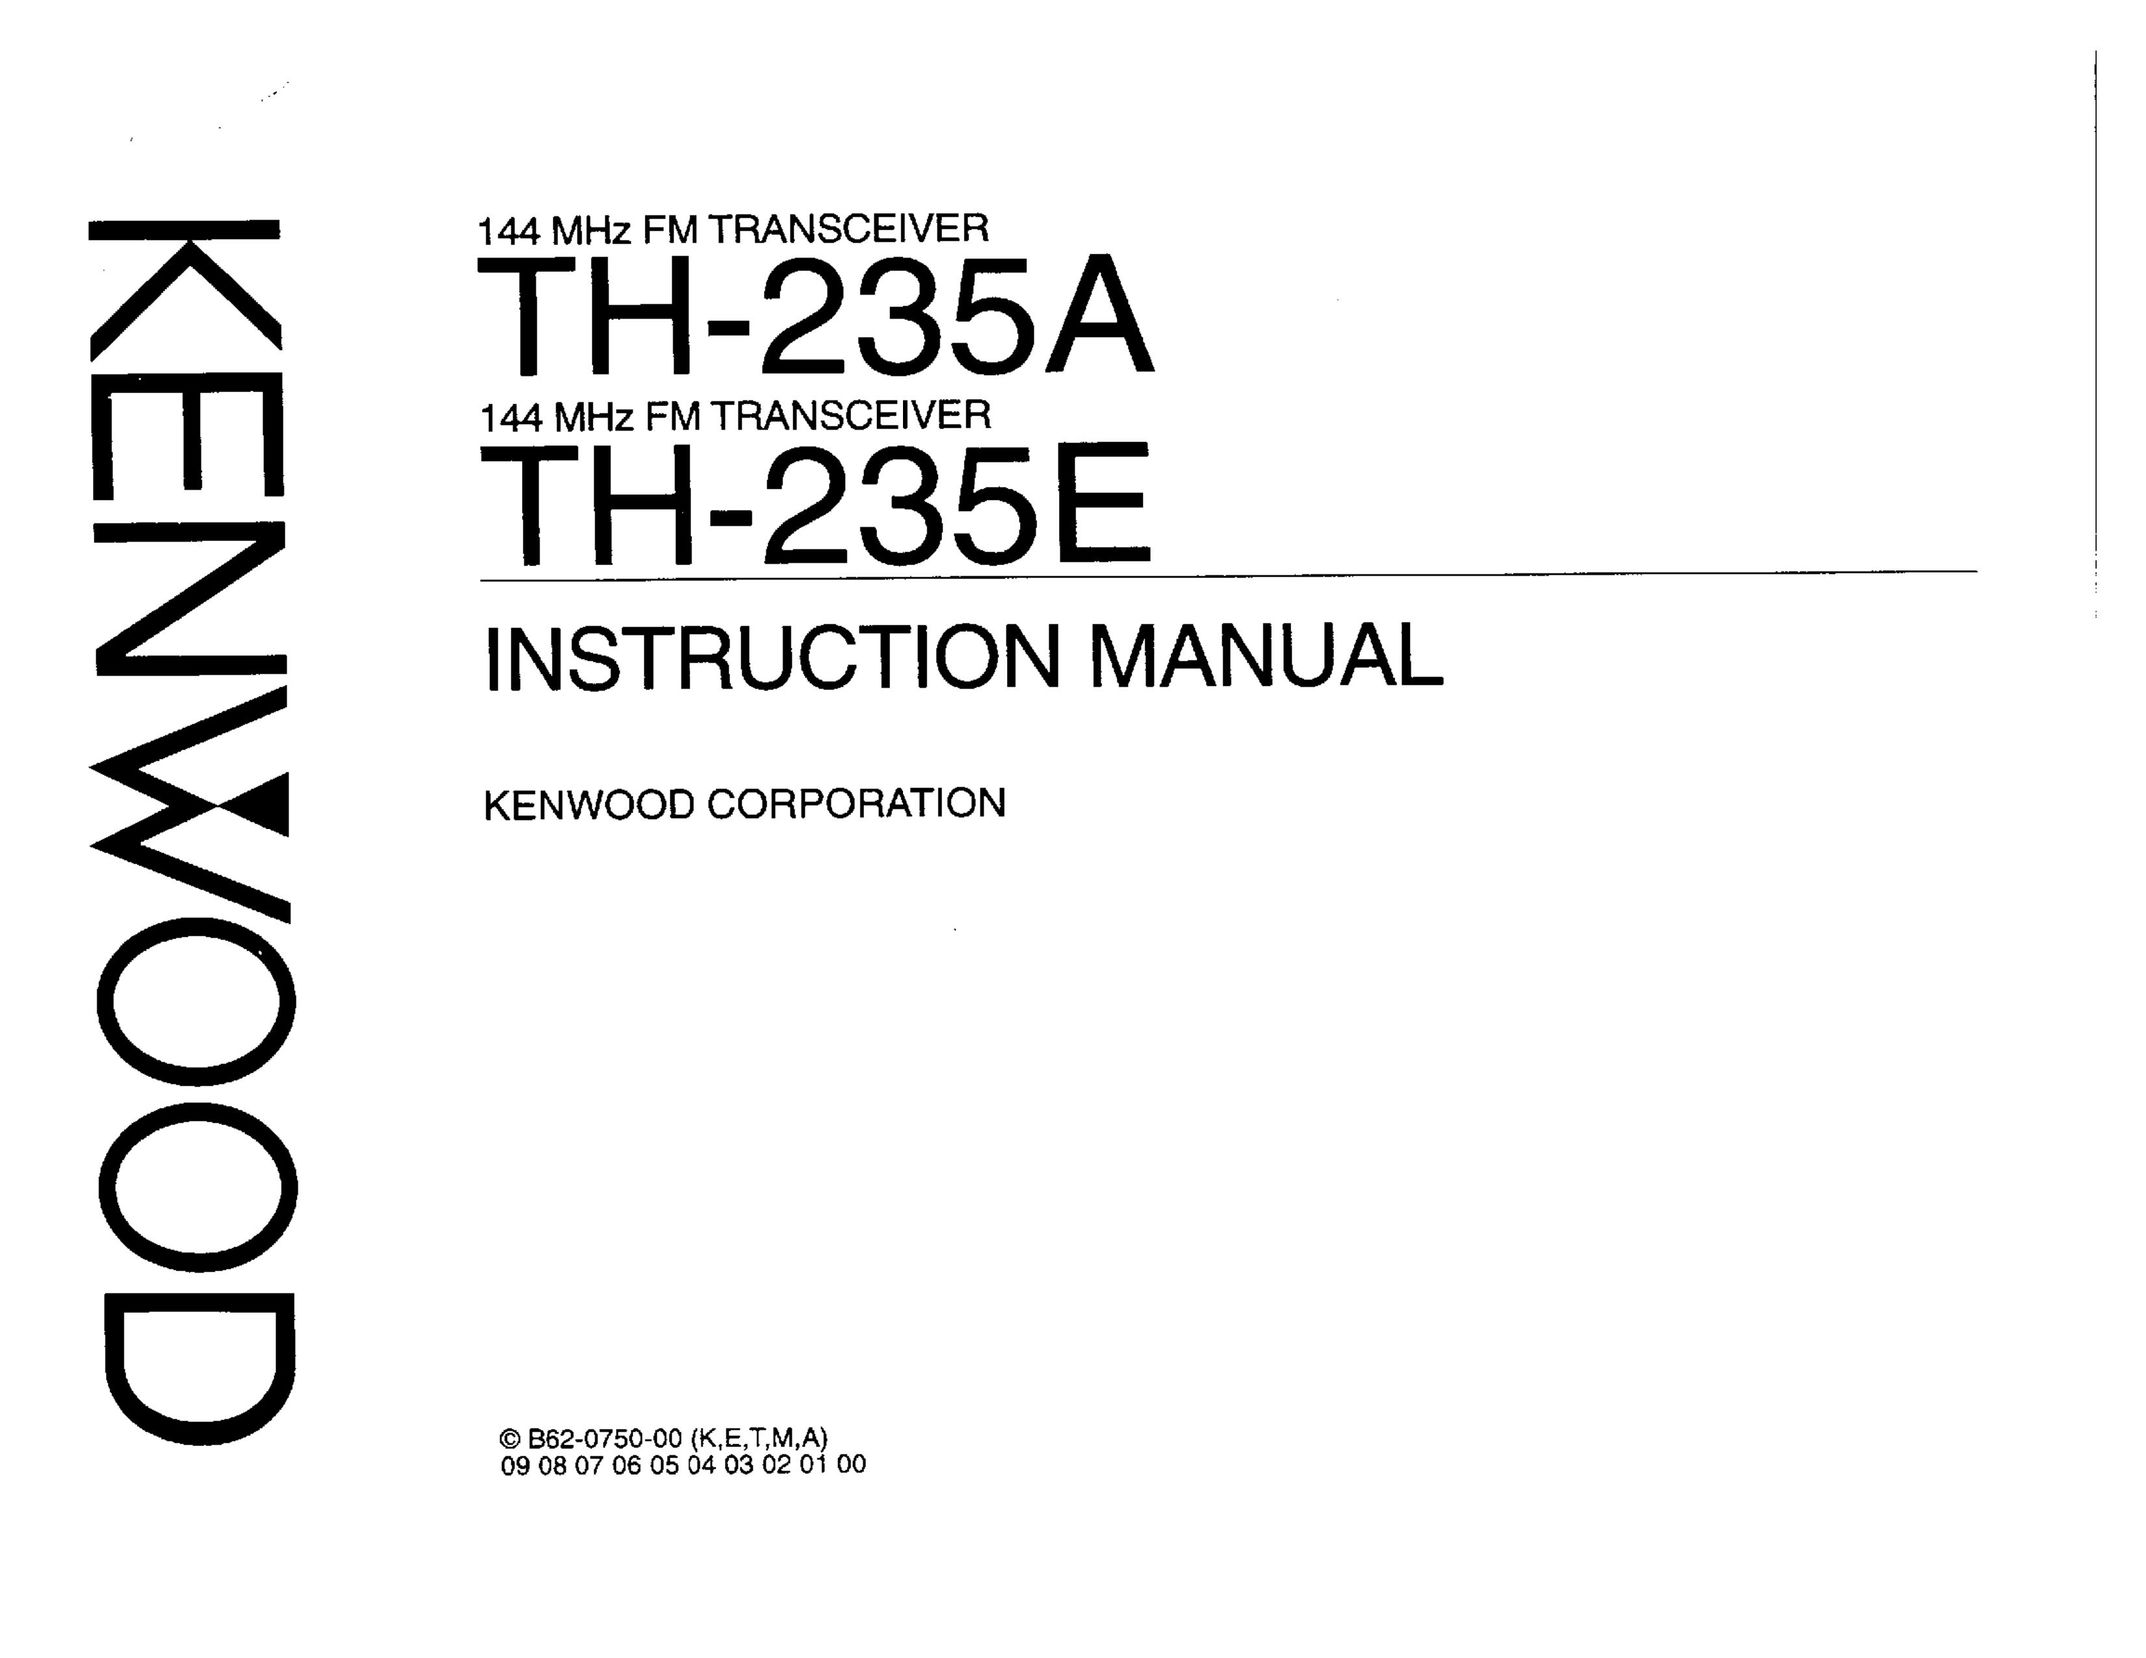 Kenwood TH-235A Microcassette Recorder User Manual